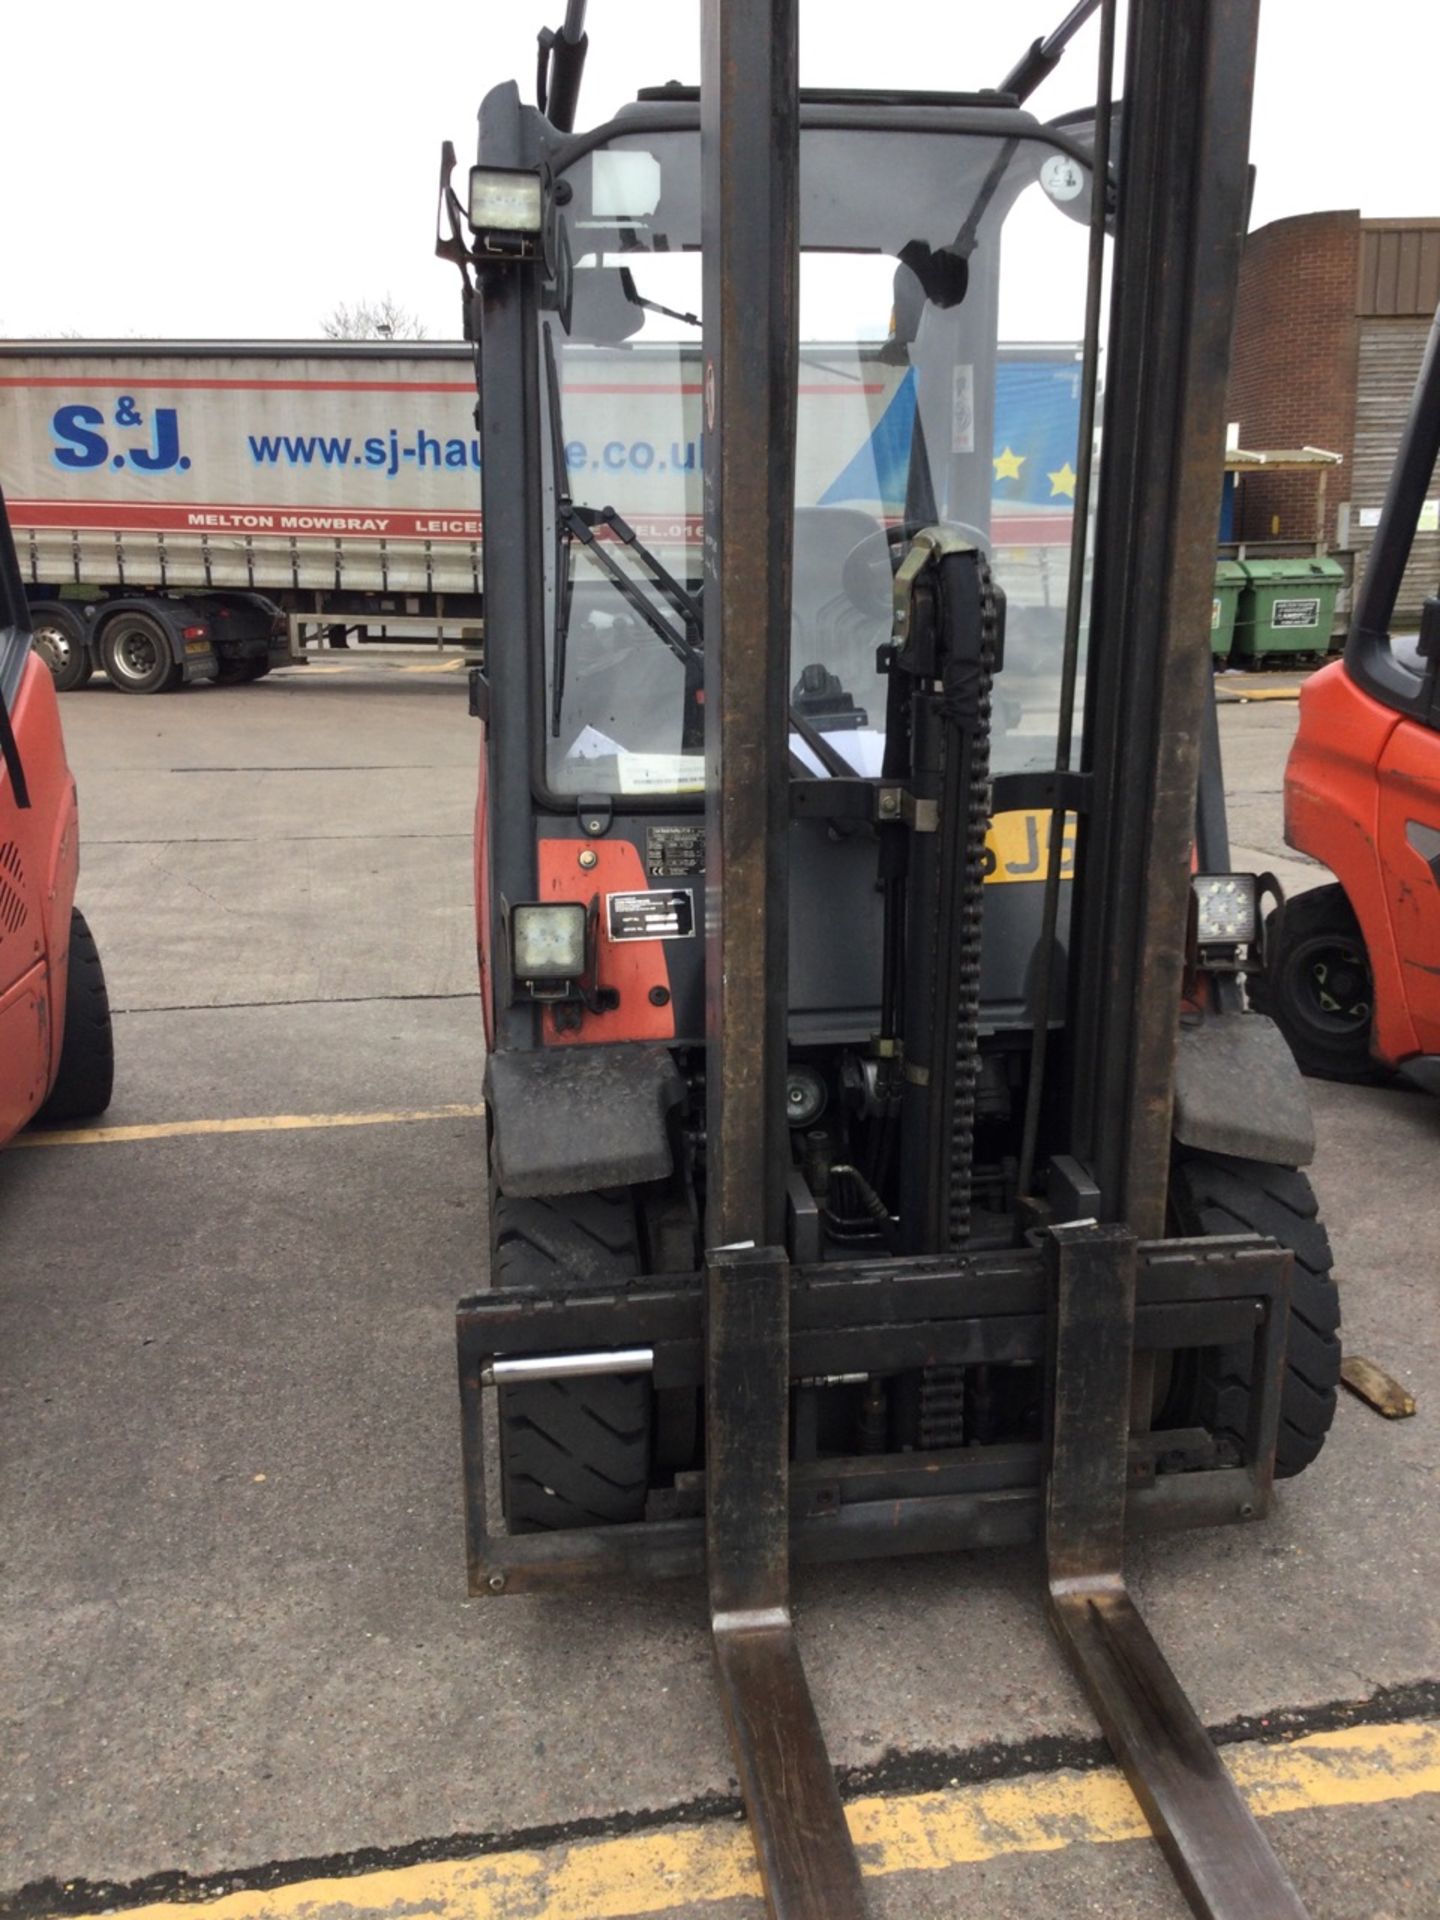 Linde H25D Counterbalance Diesel Fuelled Fork Lift Truck With Two Stage Mast And Sideshift, 26679.